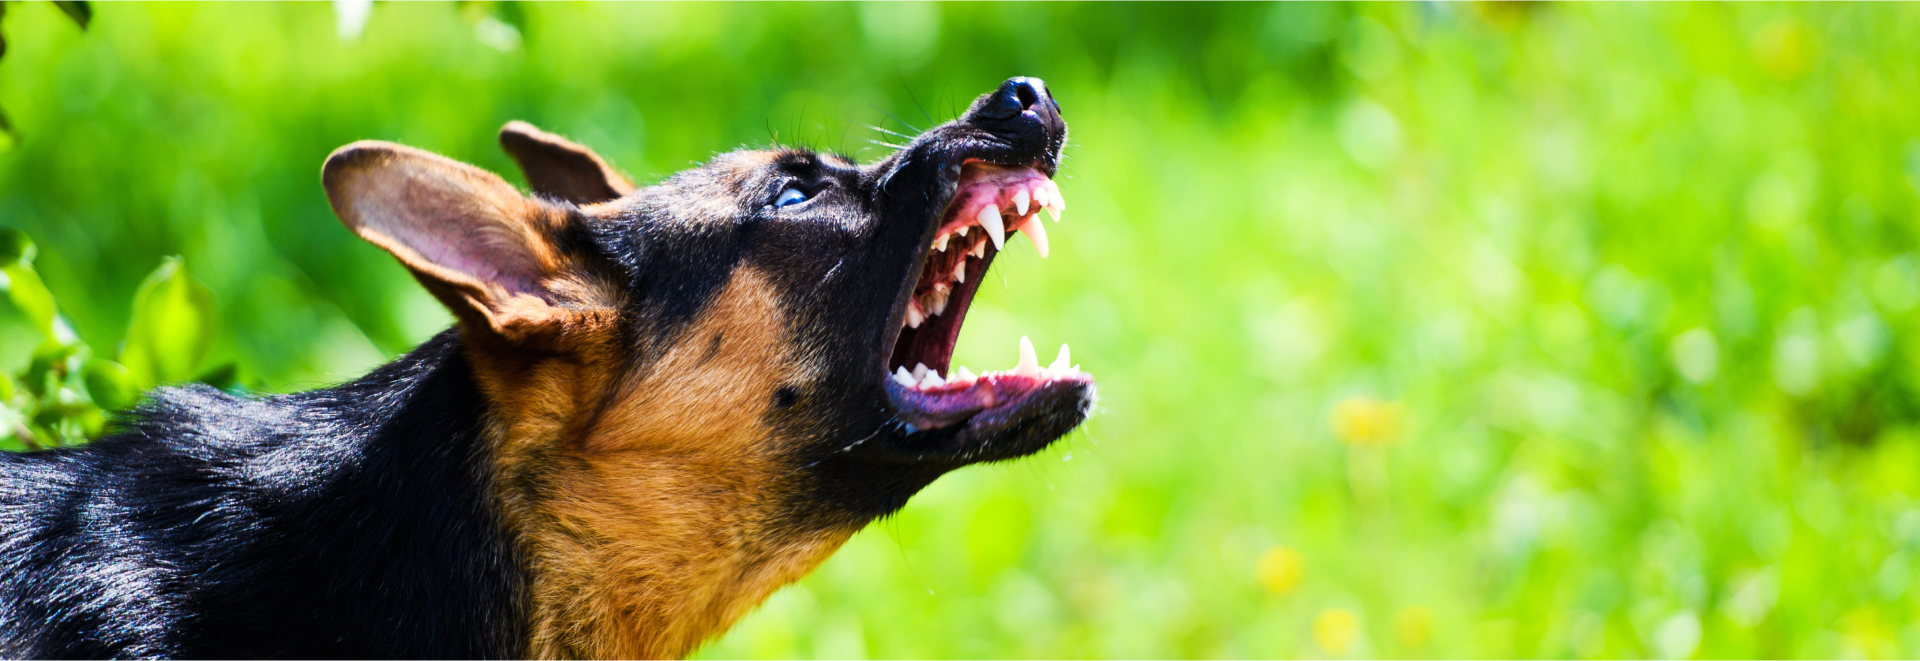 Angry dog attacks The dog looks aggressive and dangerous German Shepherd